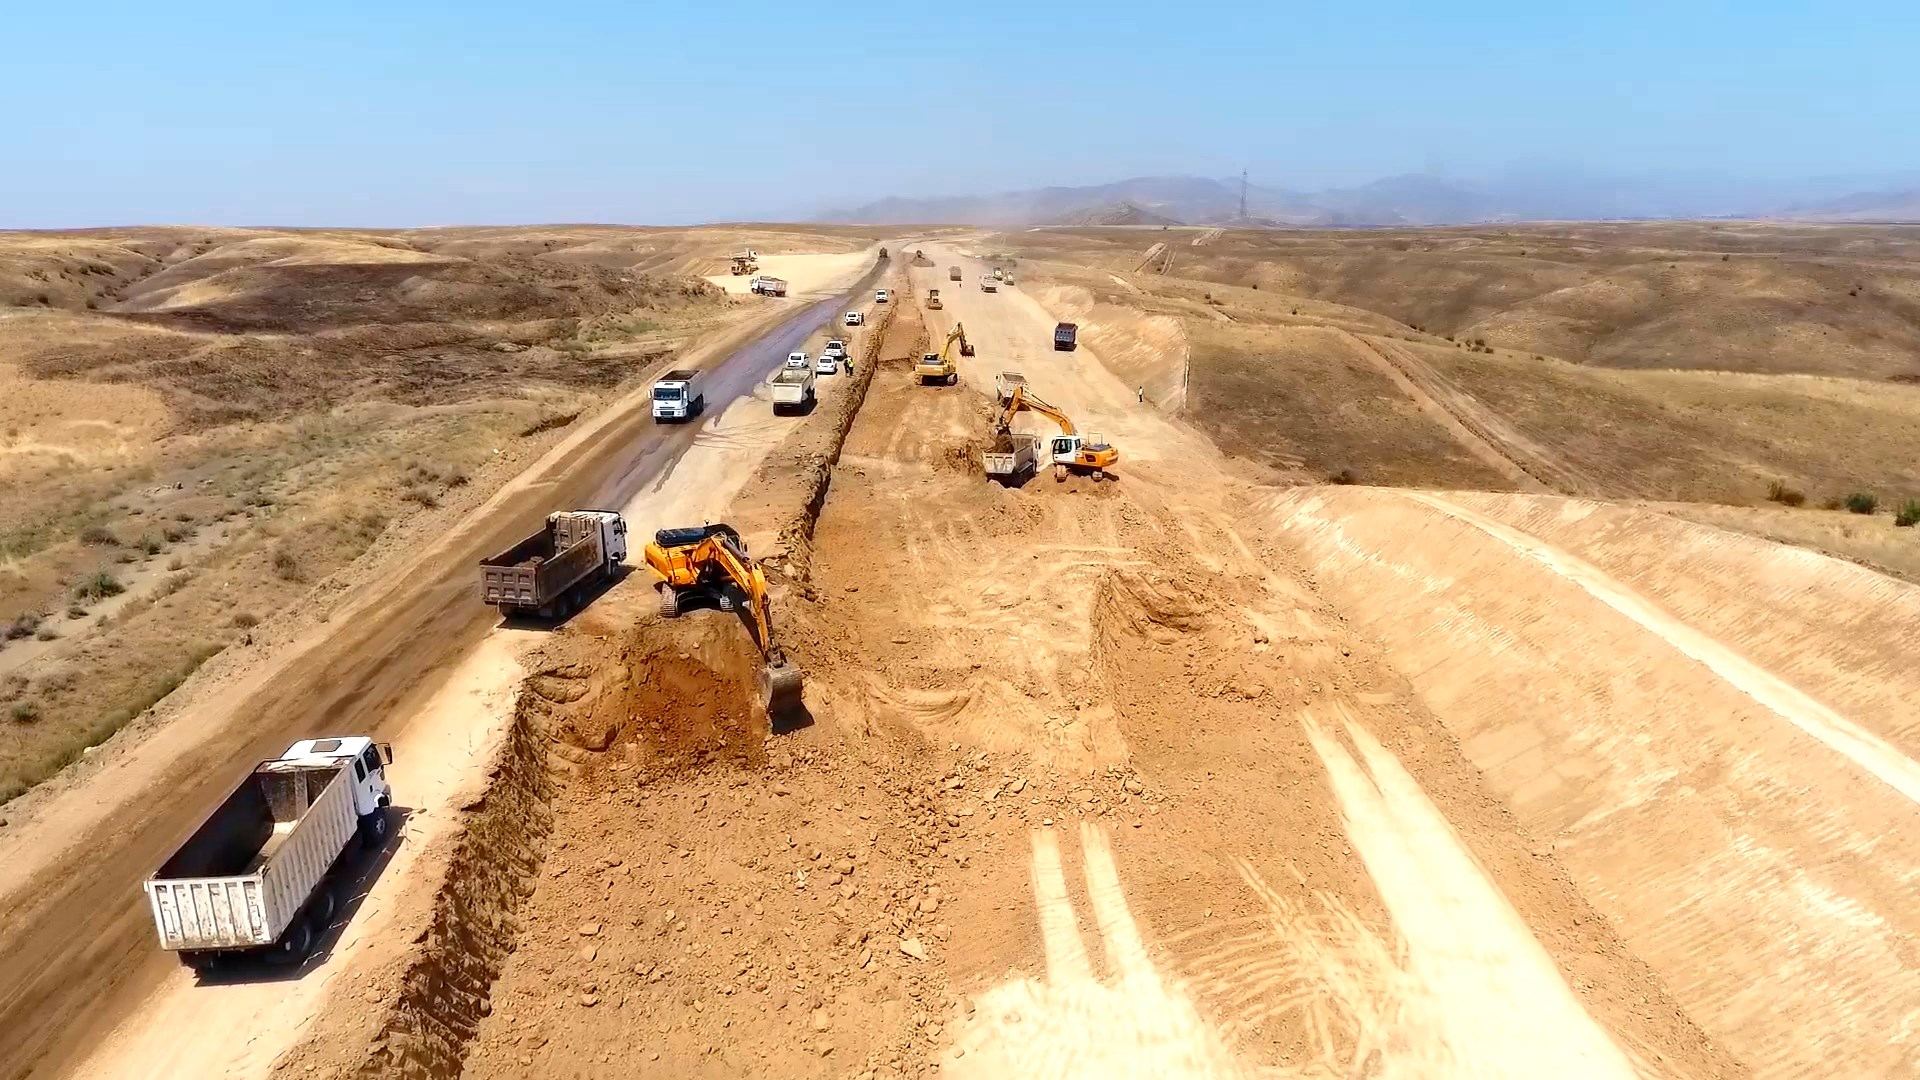 Azerbaijan reveals current state of ongoing road infrastructure projects in Karabakh, East Zangazur